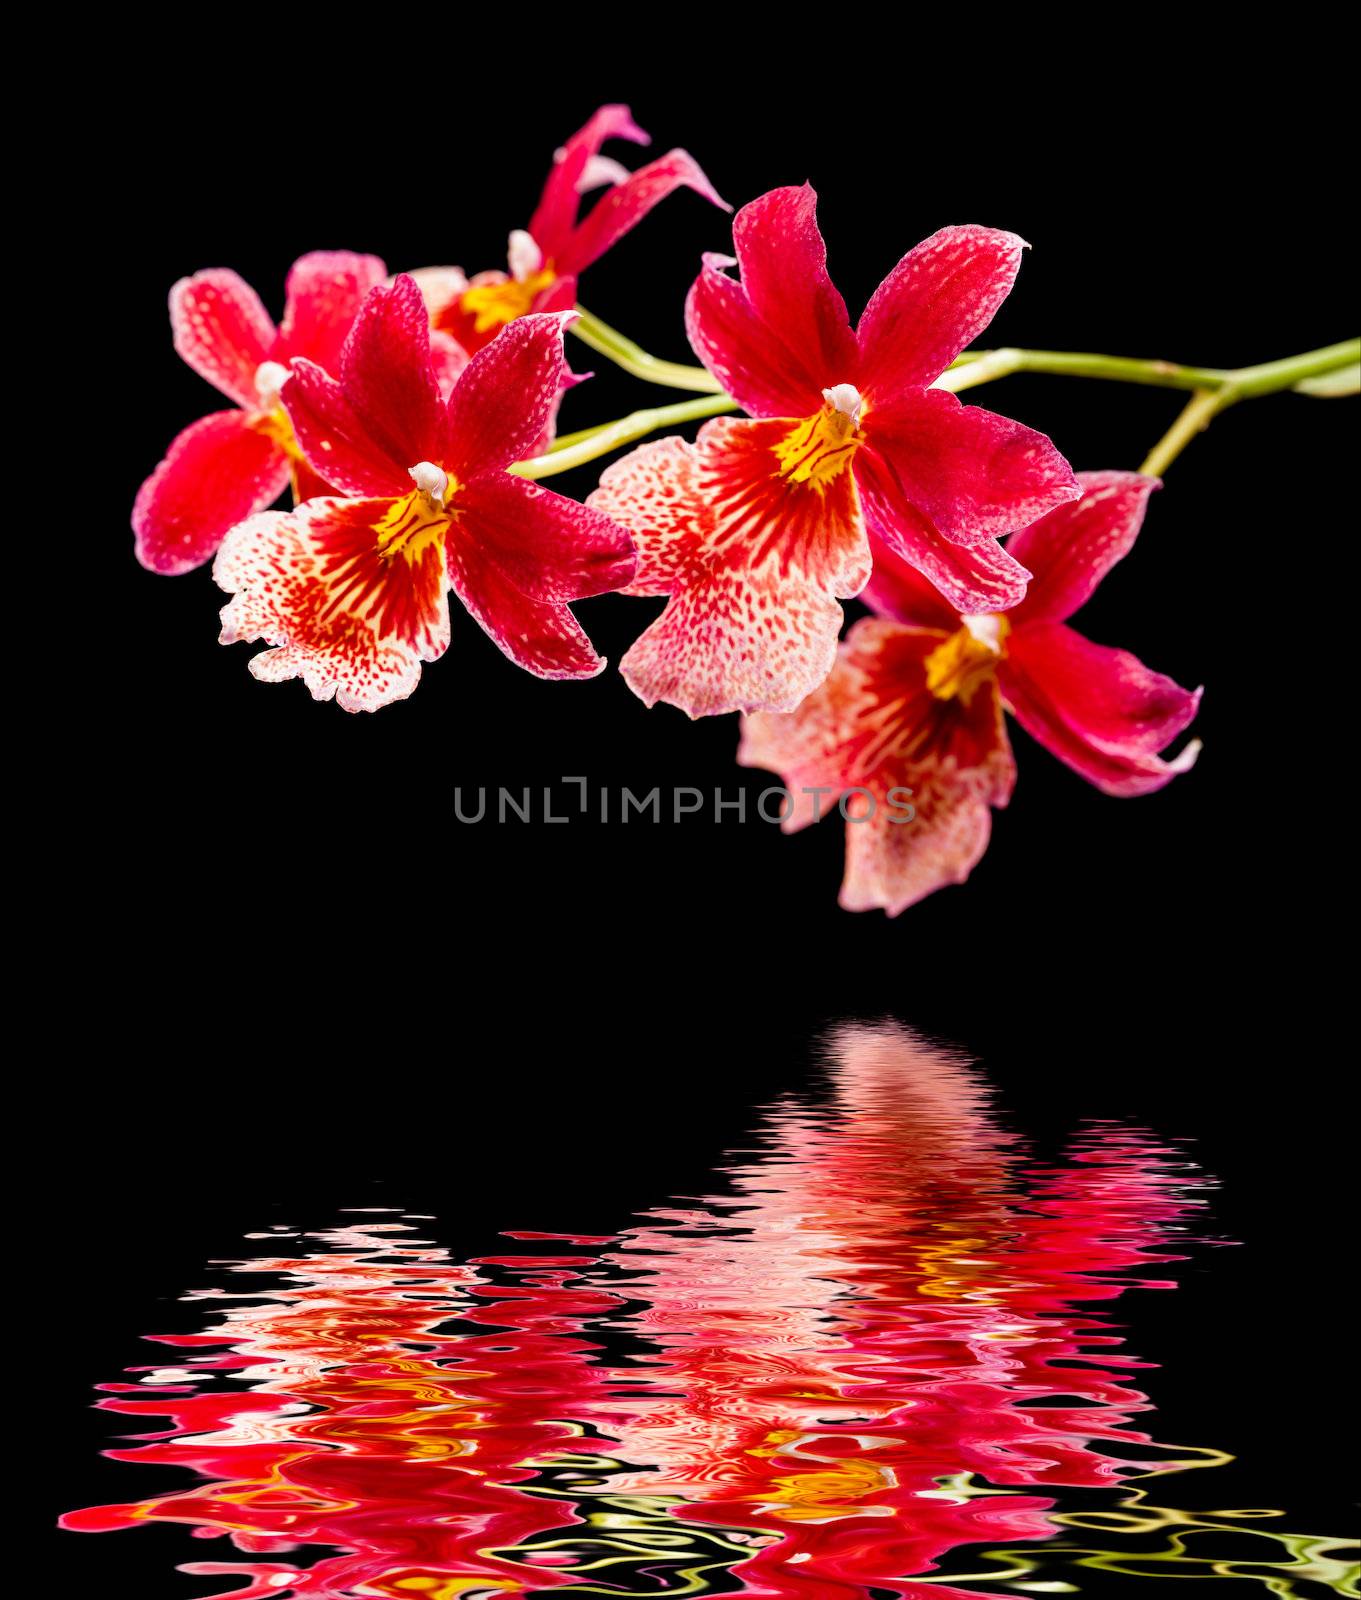 orchid and water reflection by palinchak